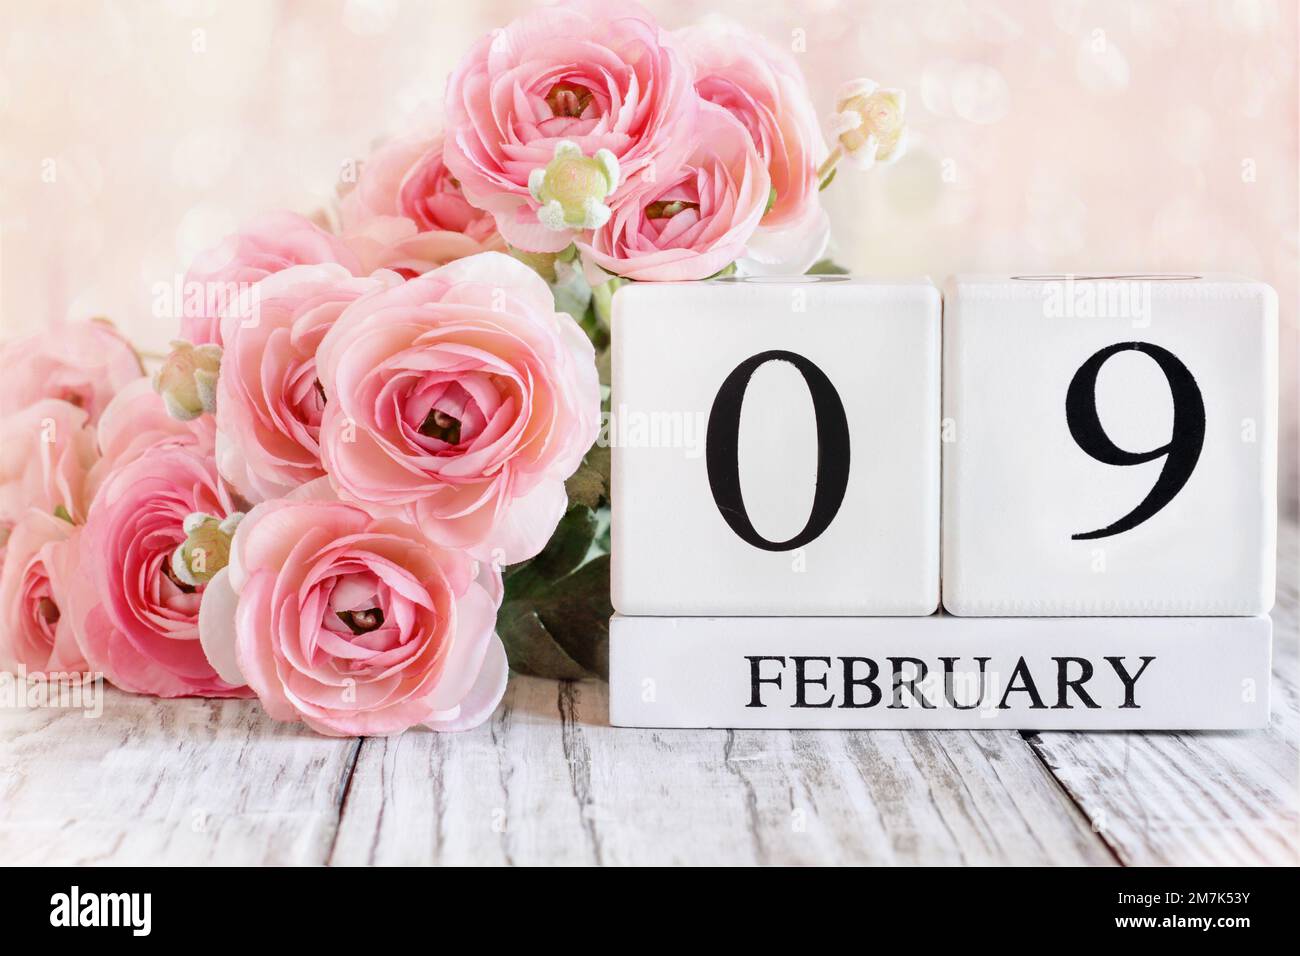 White wood calendar blocks with the date February 9th and pink ranunculus flowers over a wooden table. Stock Photo